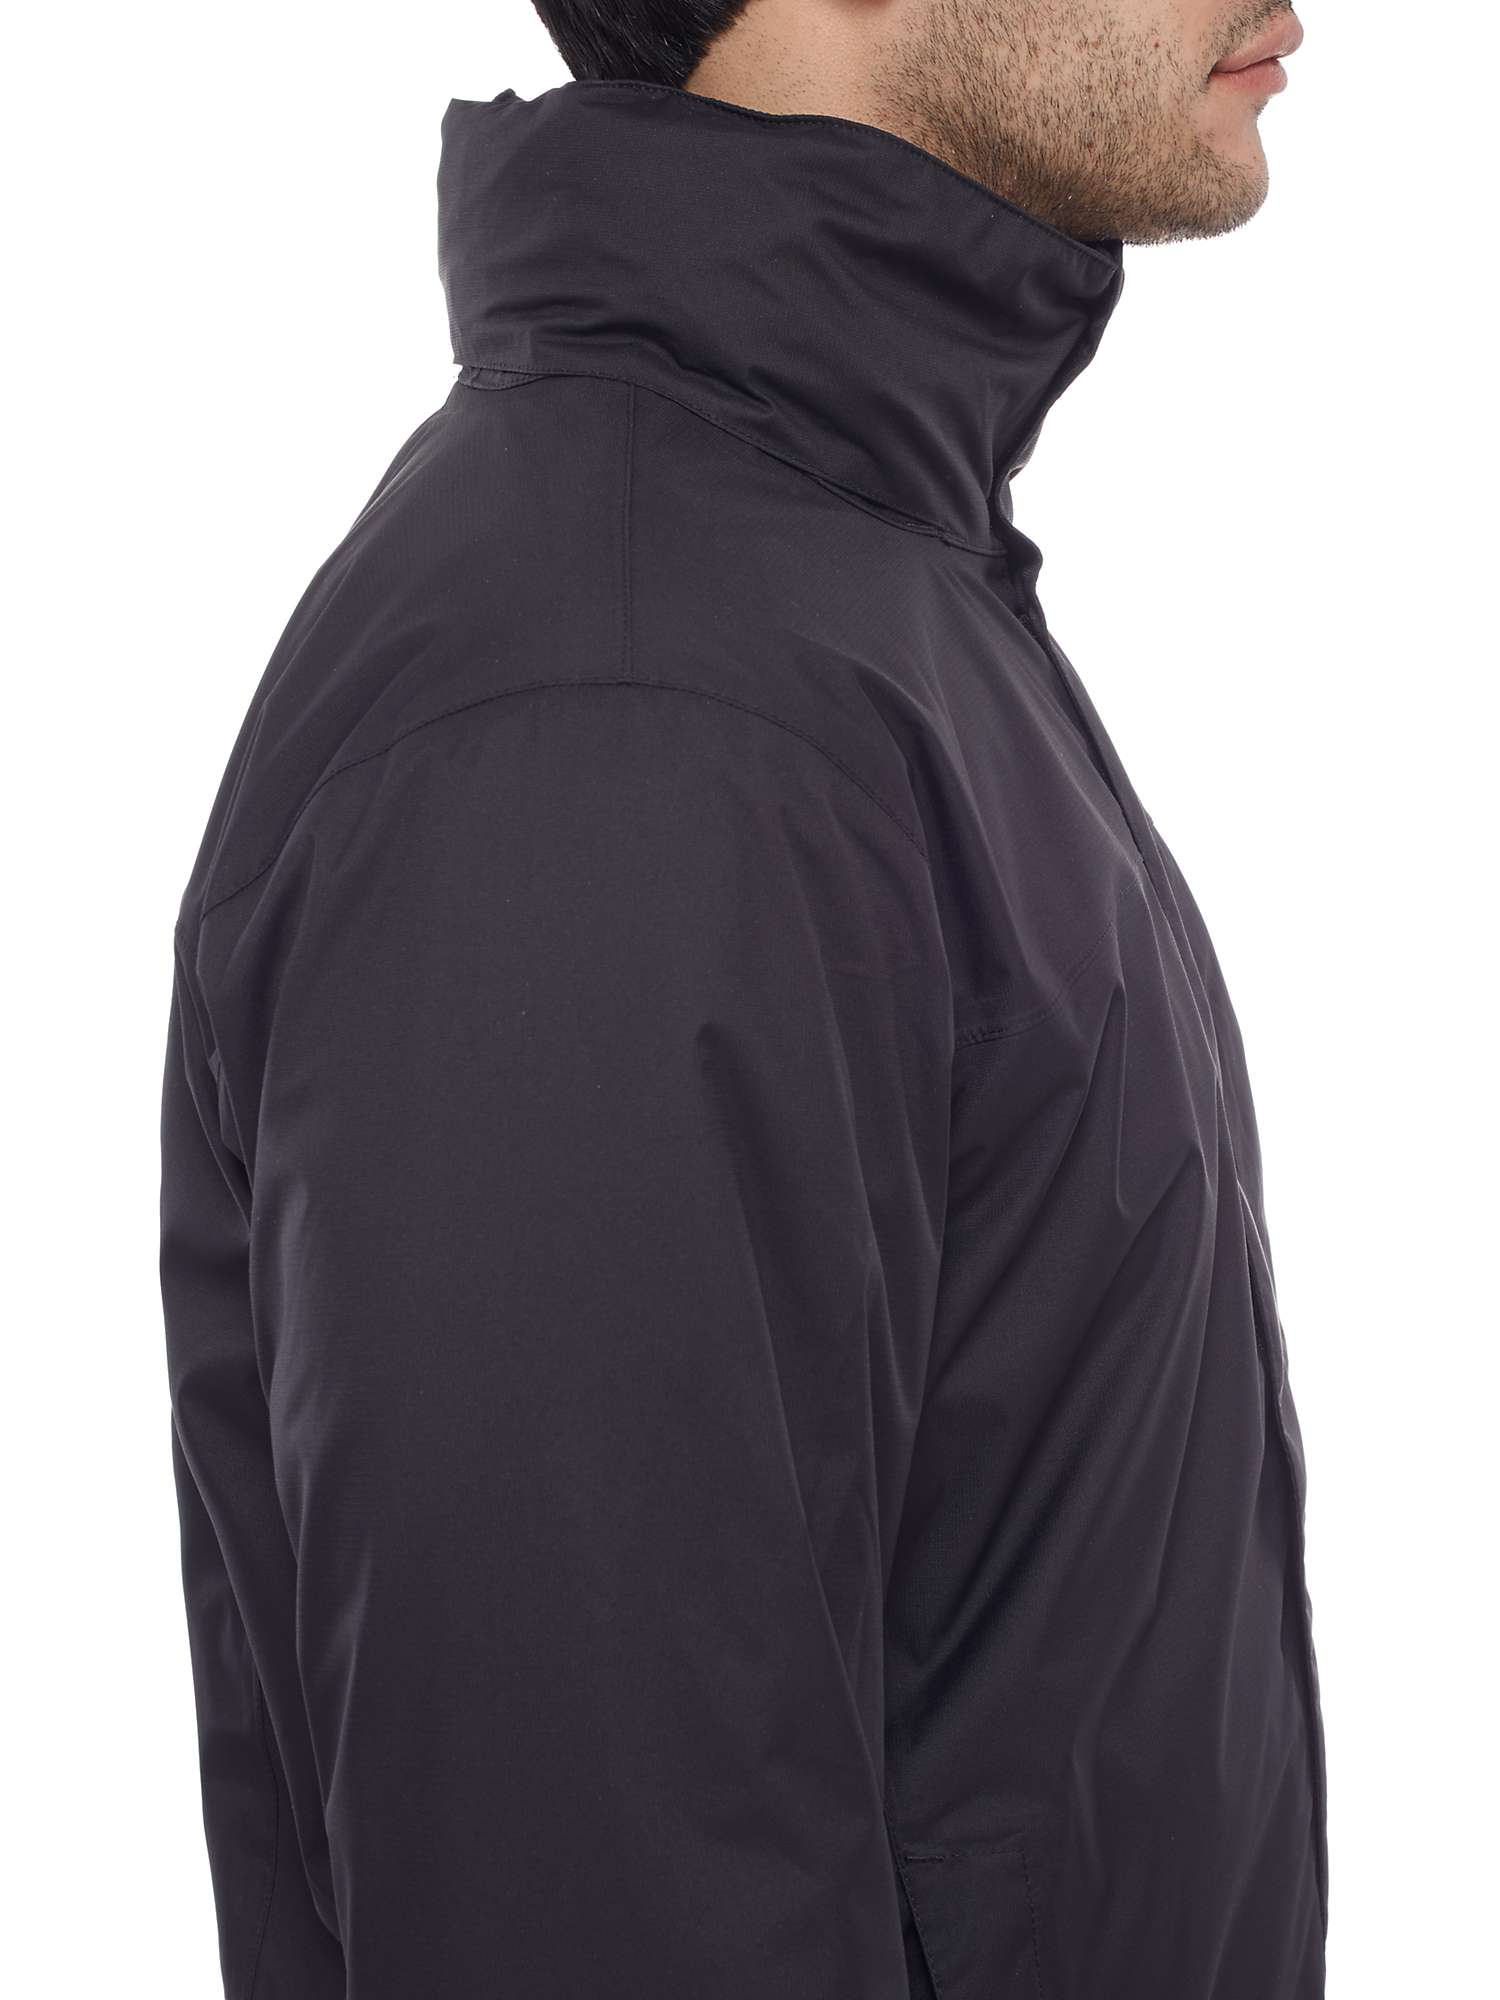 Buy The North Face Evolve II Triclimate 3-in-1 Waterproof Men's Jacket Online at johnlewis.com